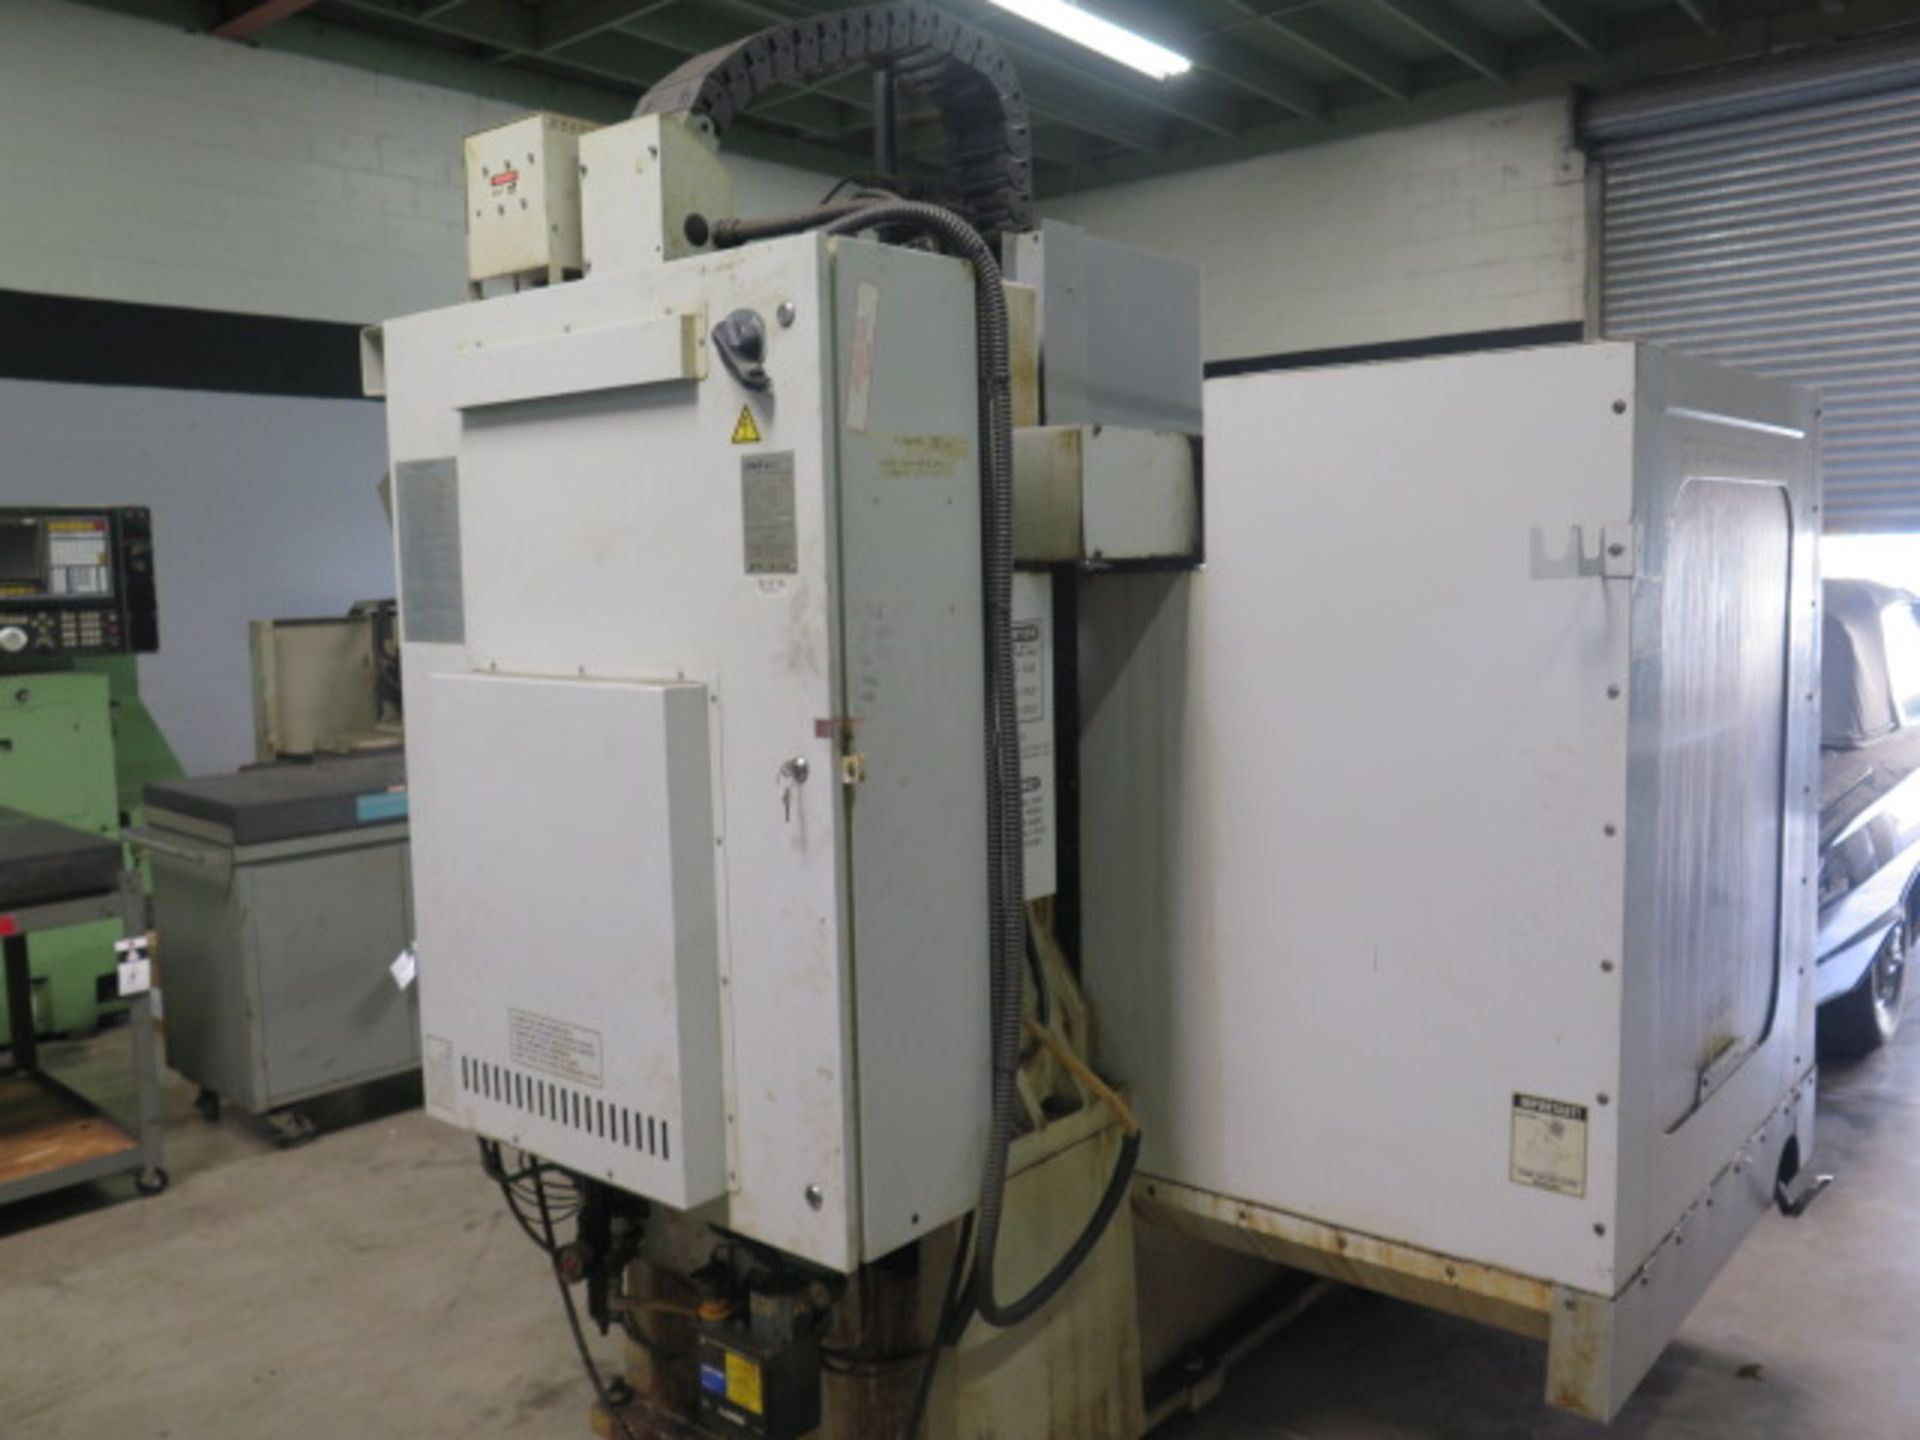 2000 Haas VF-0E CNC Vertical Machining Center s/n 20355 w/ Haas Controls, 20-Station ATC, CAT-40 Ta - Image 13 of 18